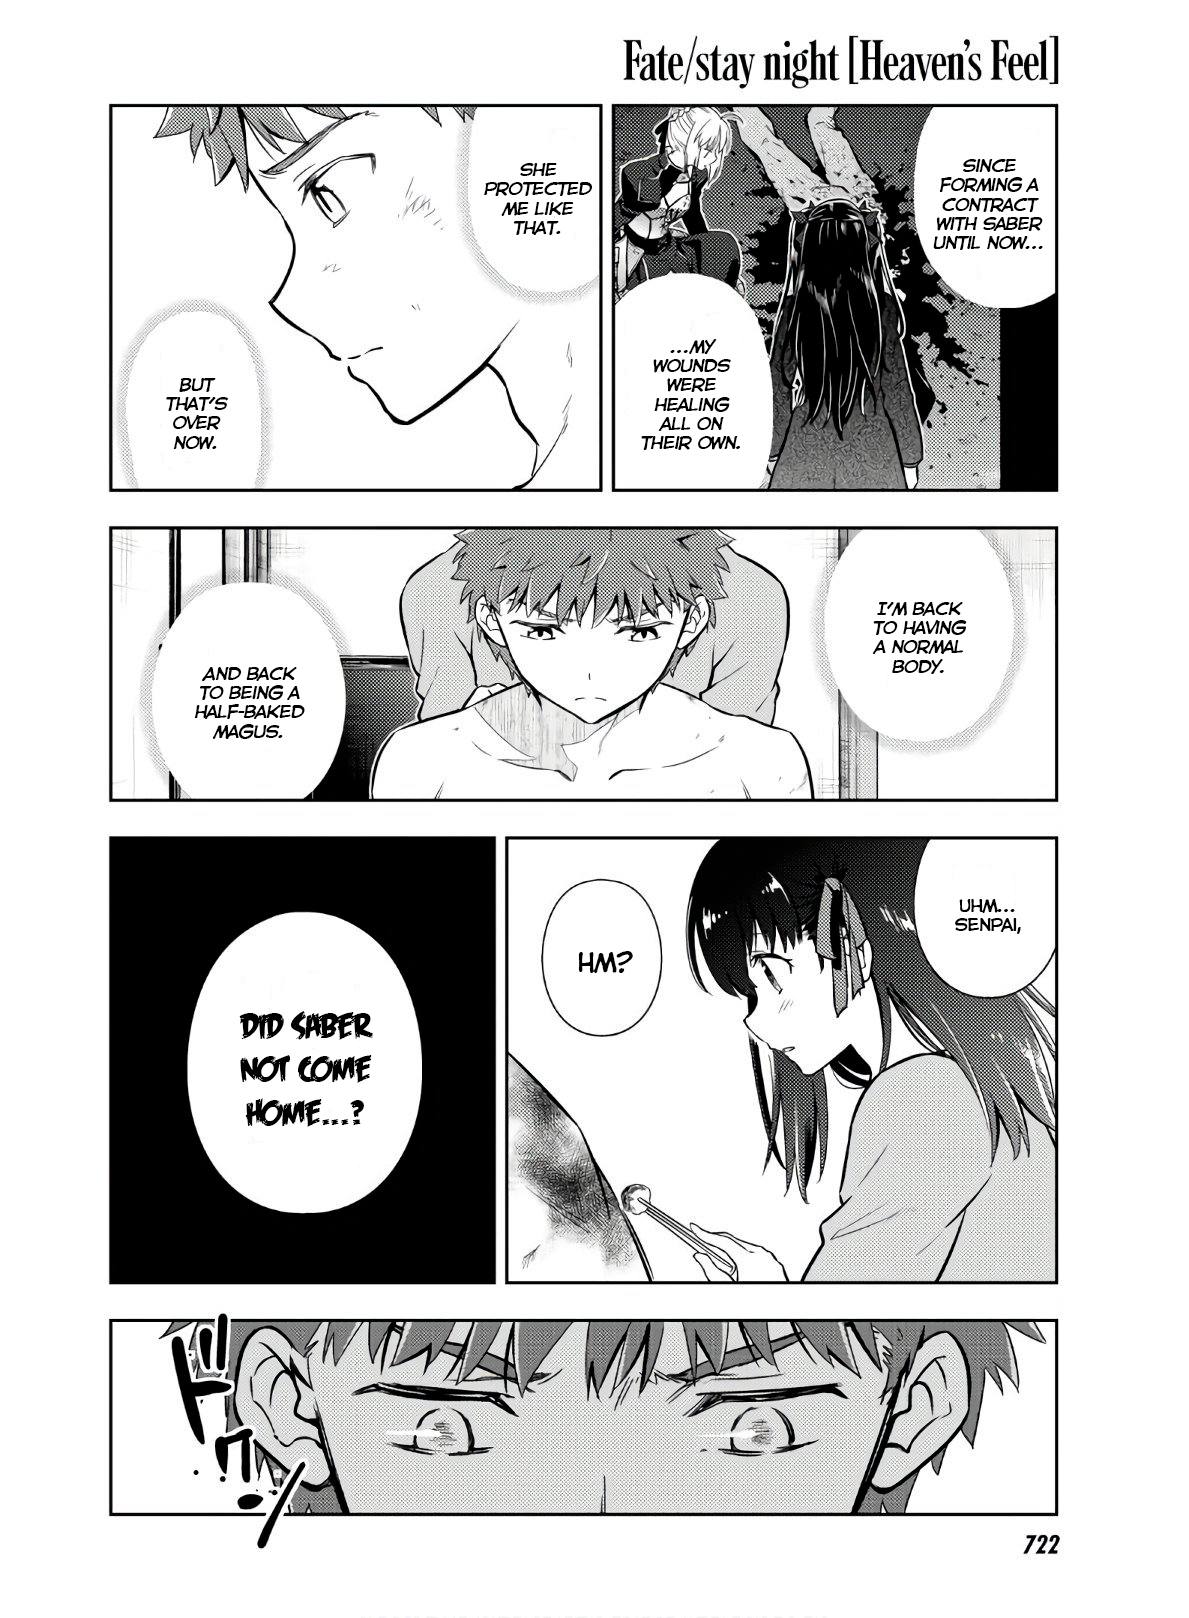 Fate/stay Night - Heaven's Feel Chapter 58: Day 8 / An Oath And A Farewell (2) - Picture 2